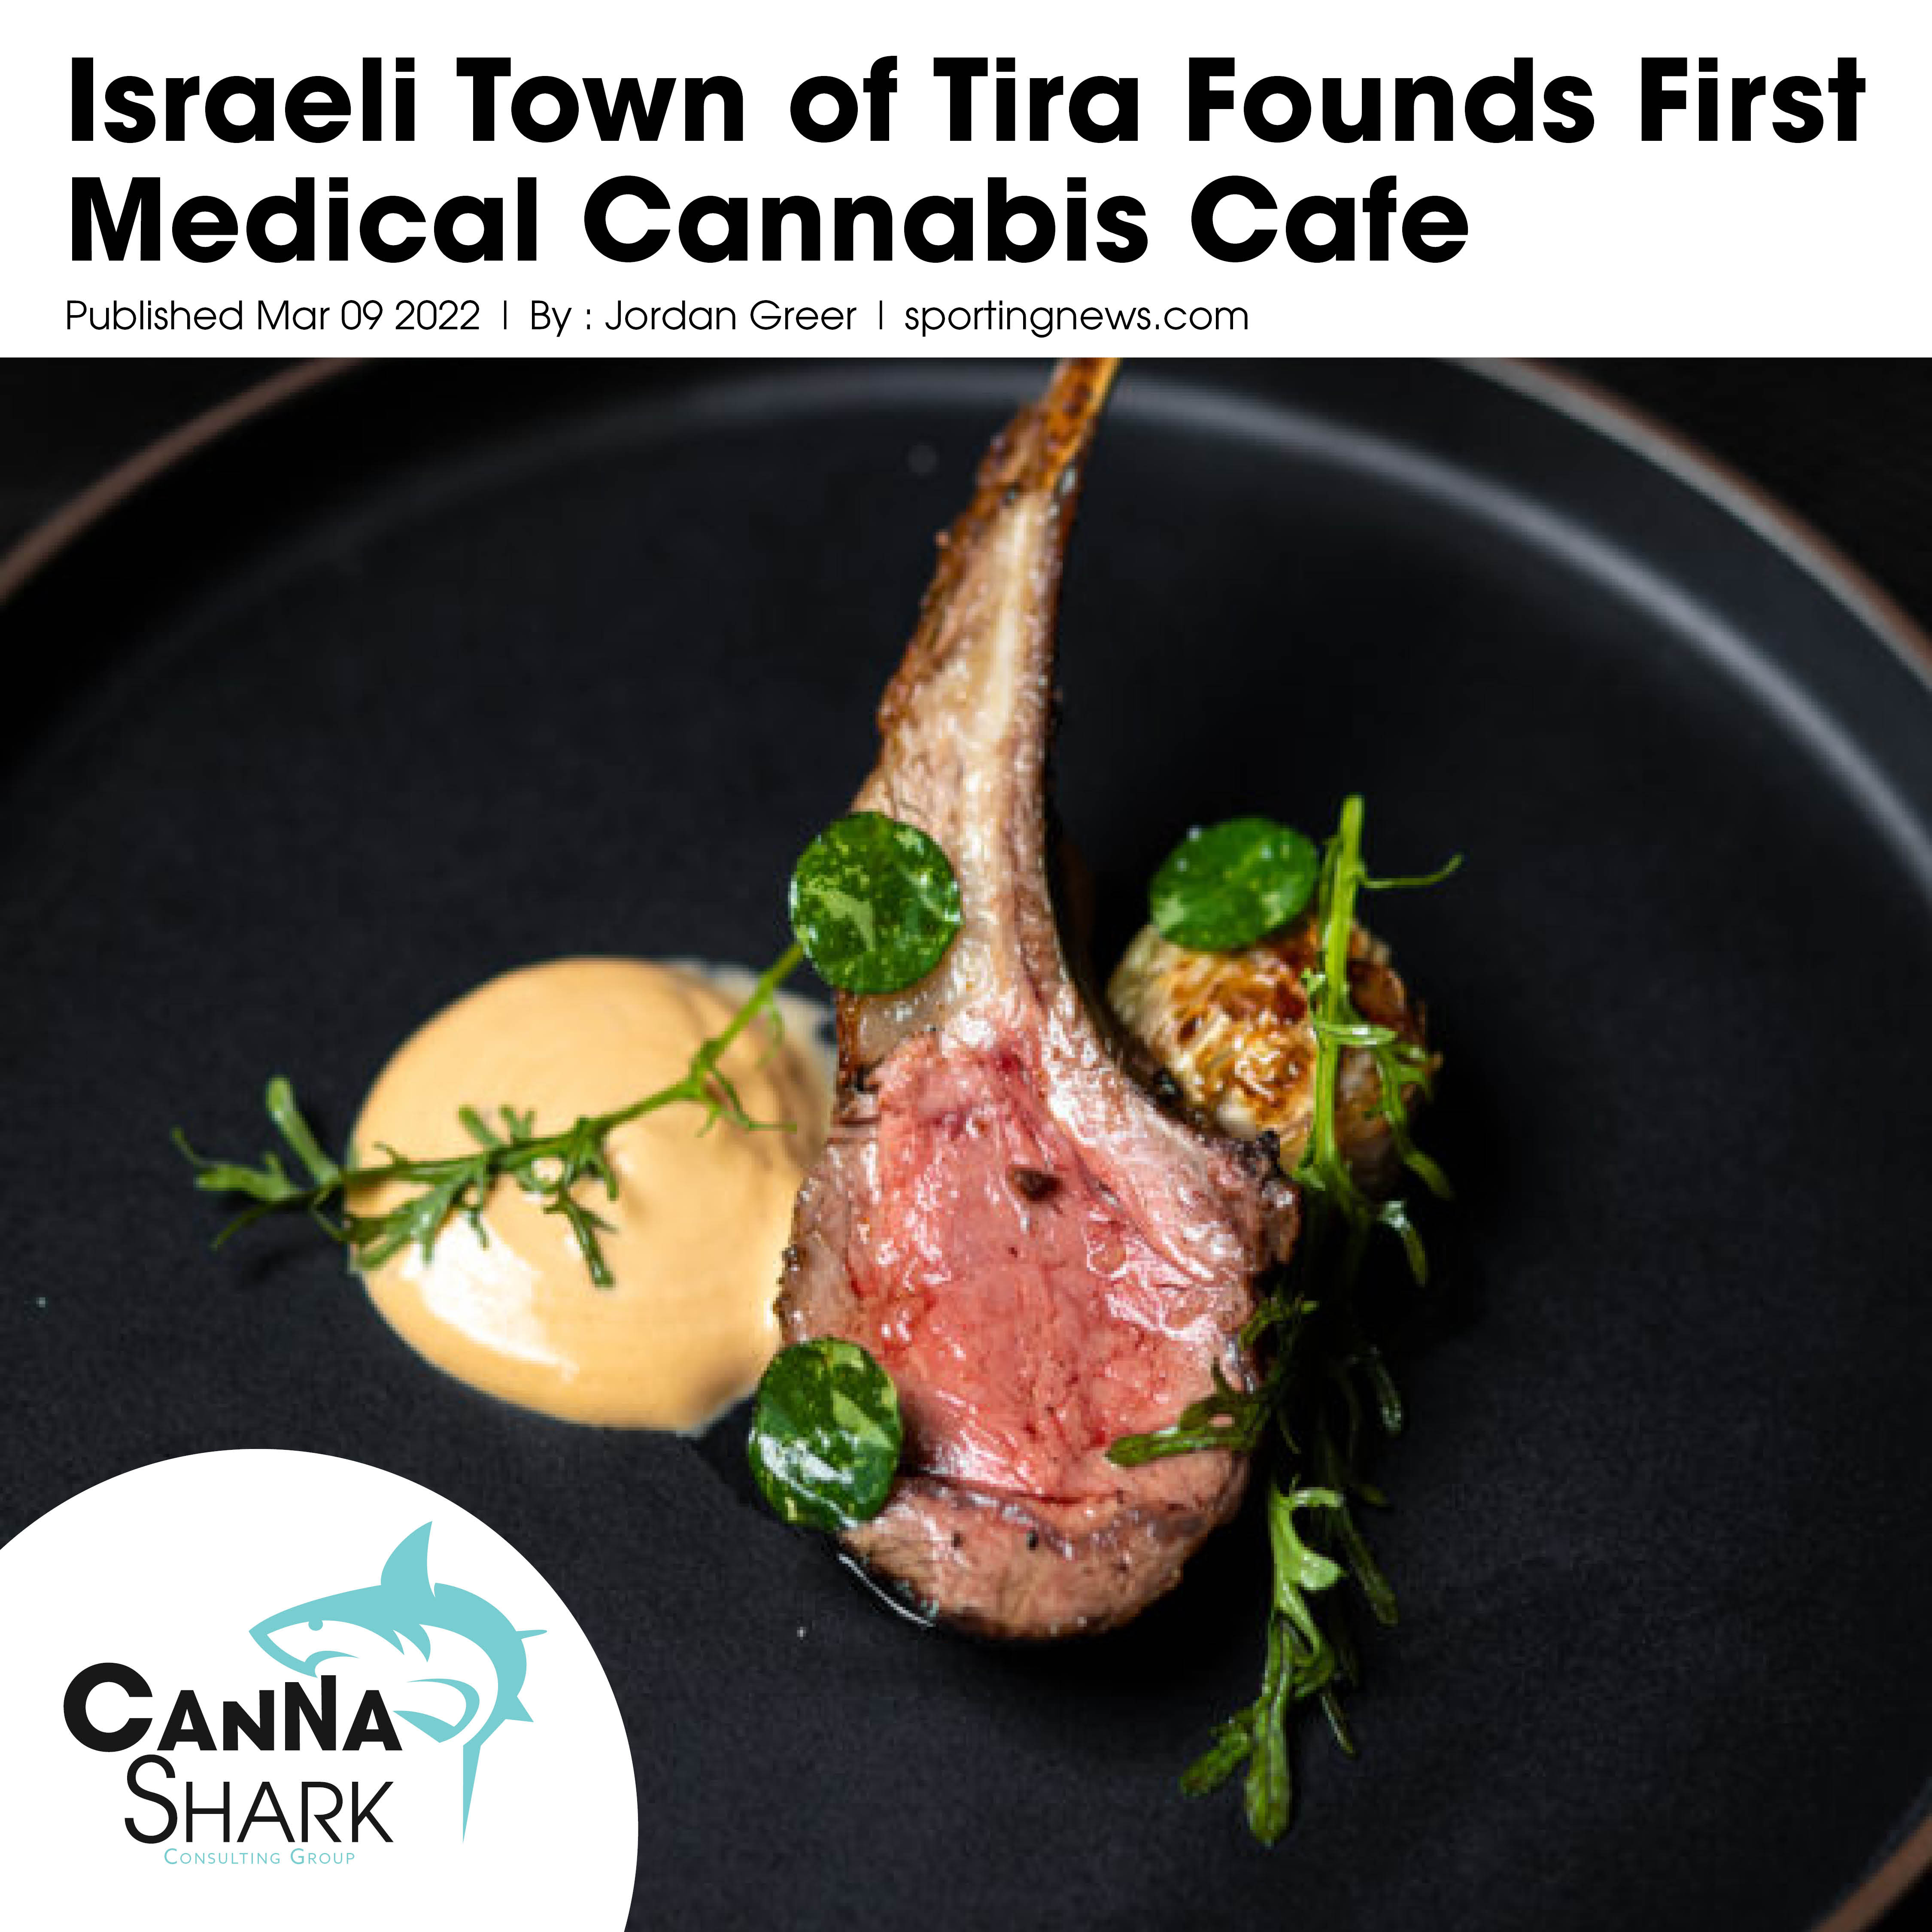 Israeli Town of Tira Founds First Medical Cannabis Cafe